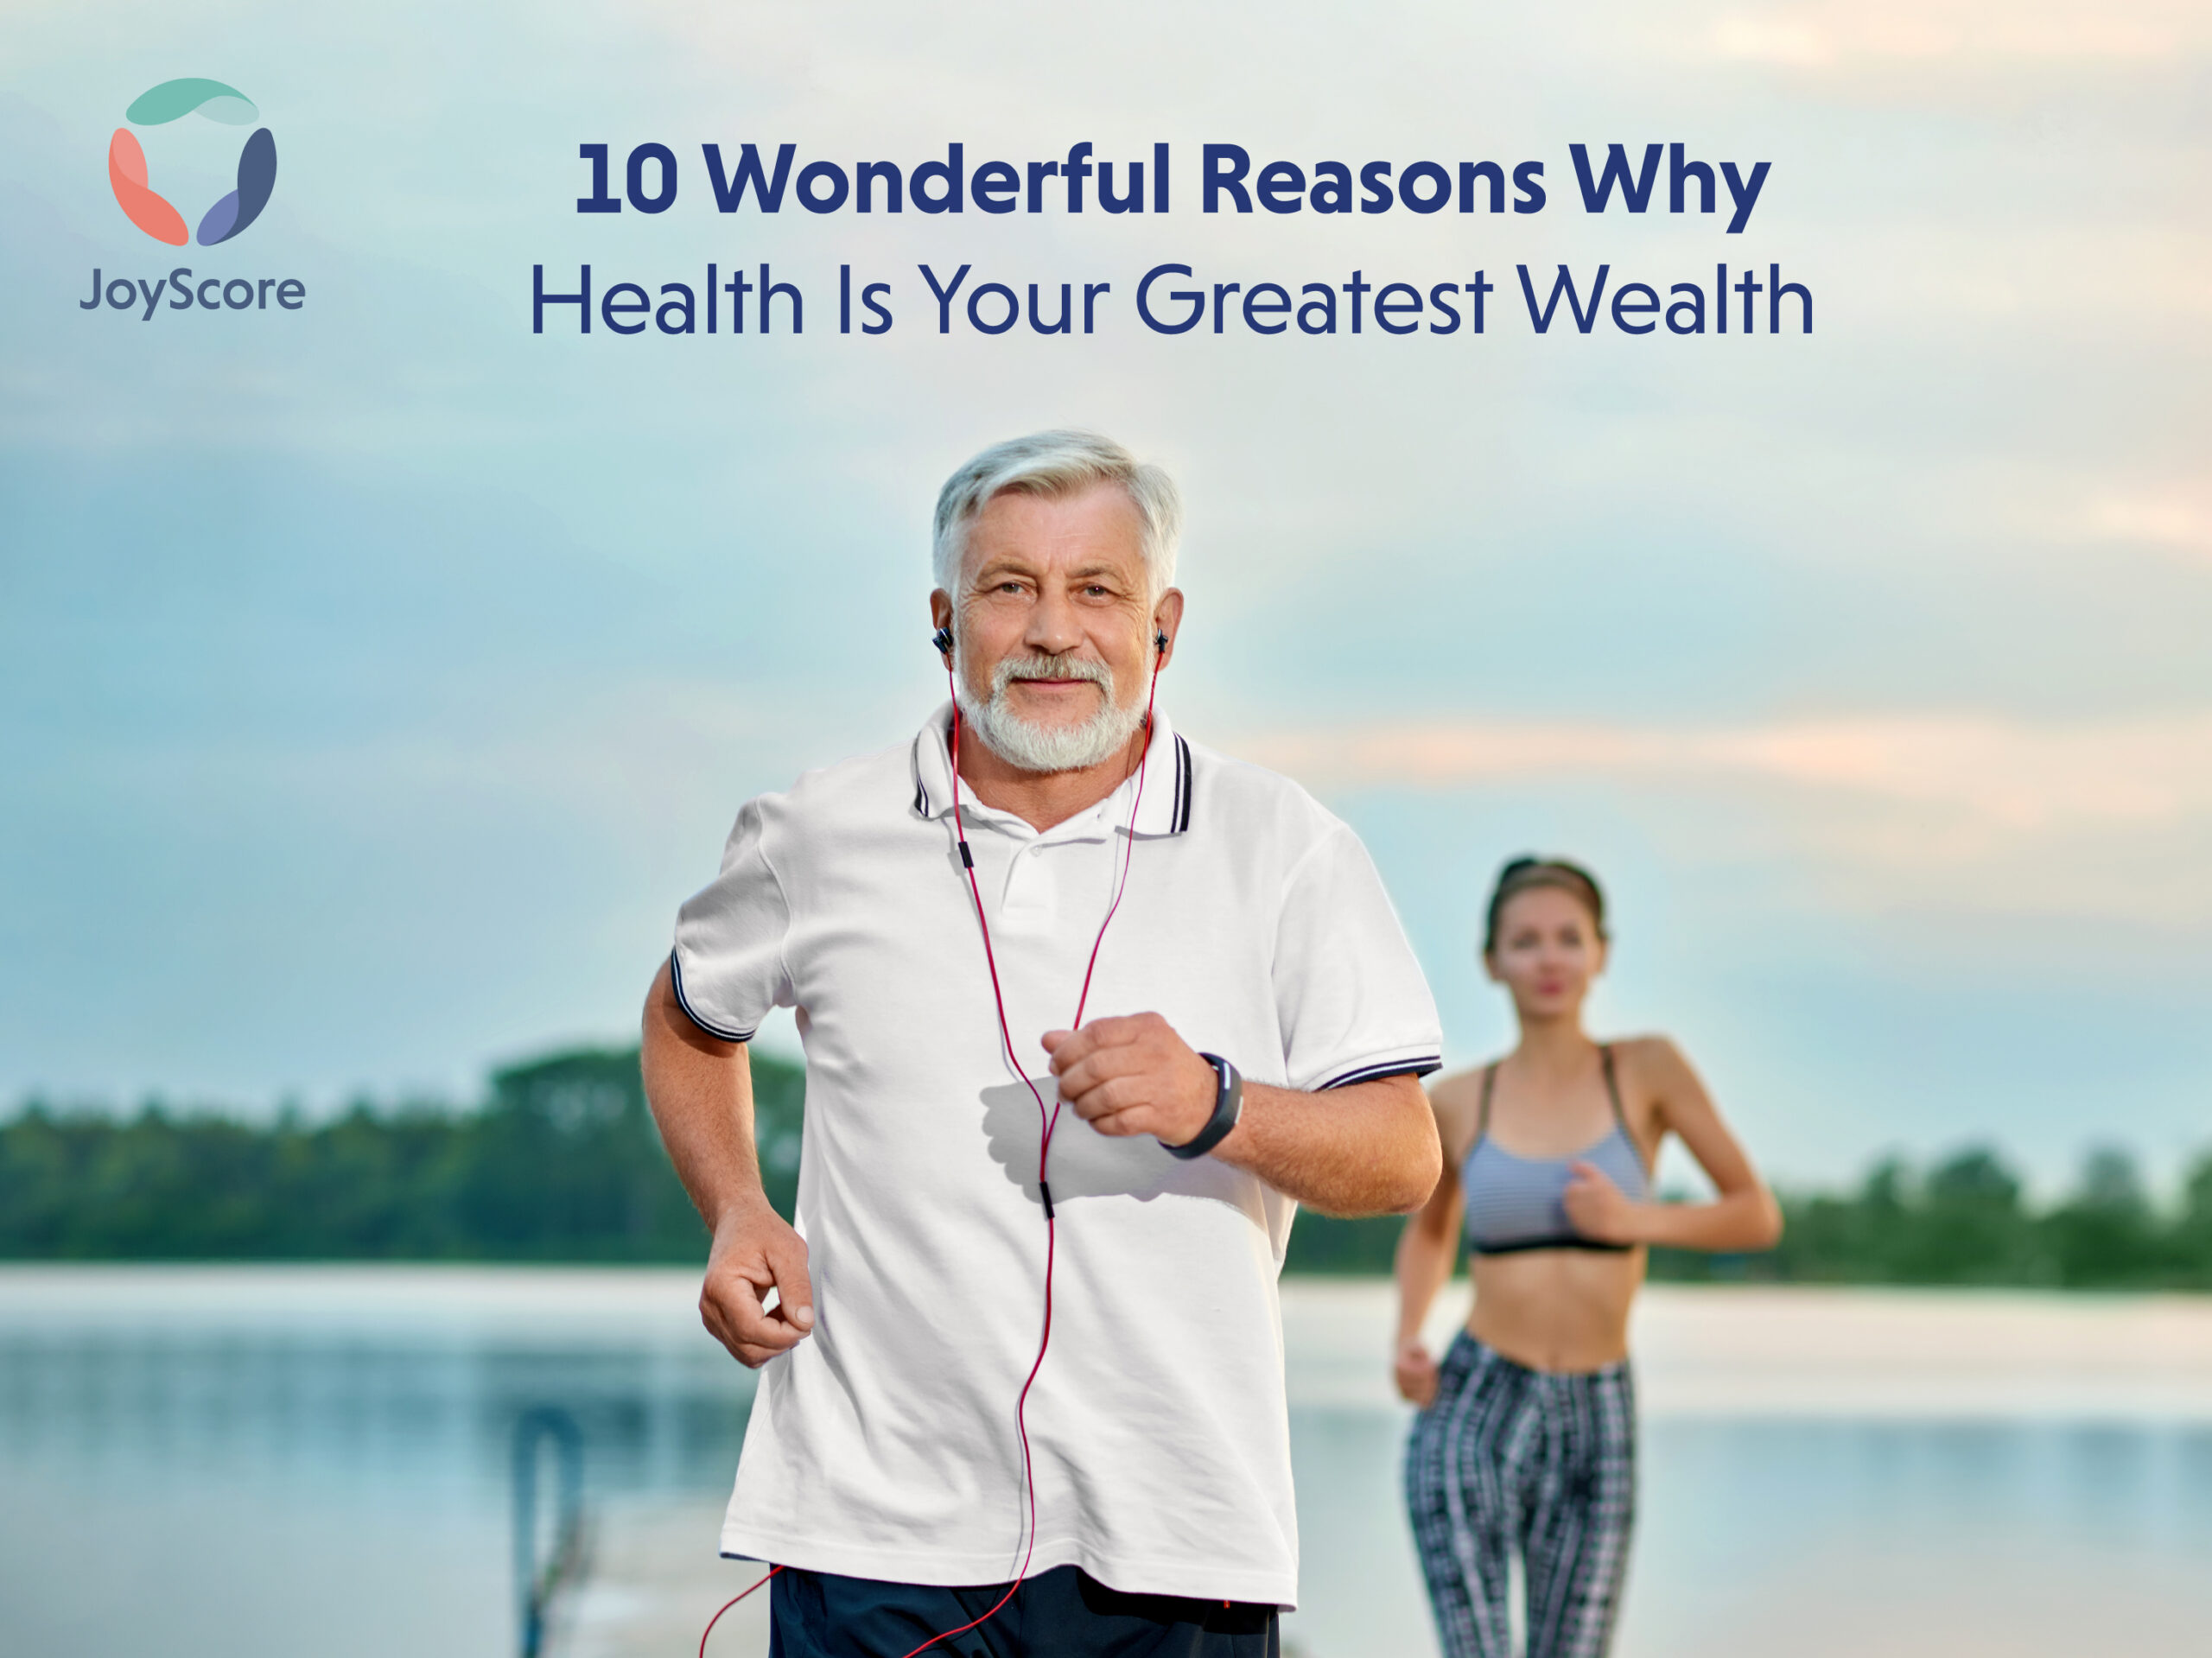 10 wonderful reasons why health is your greatest wealth